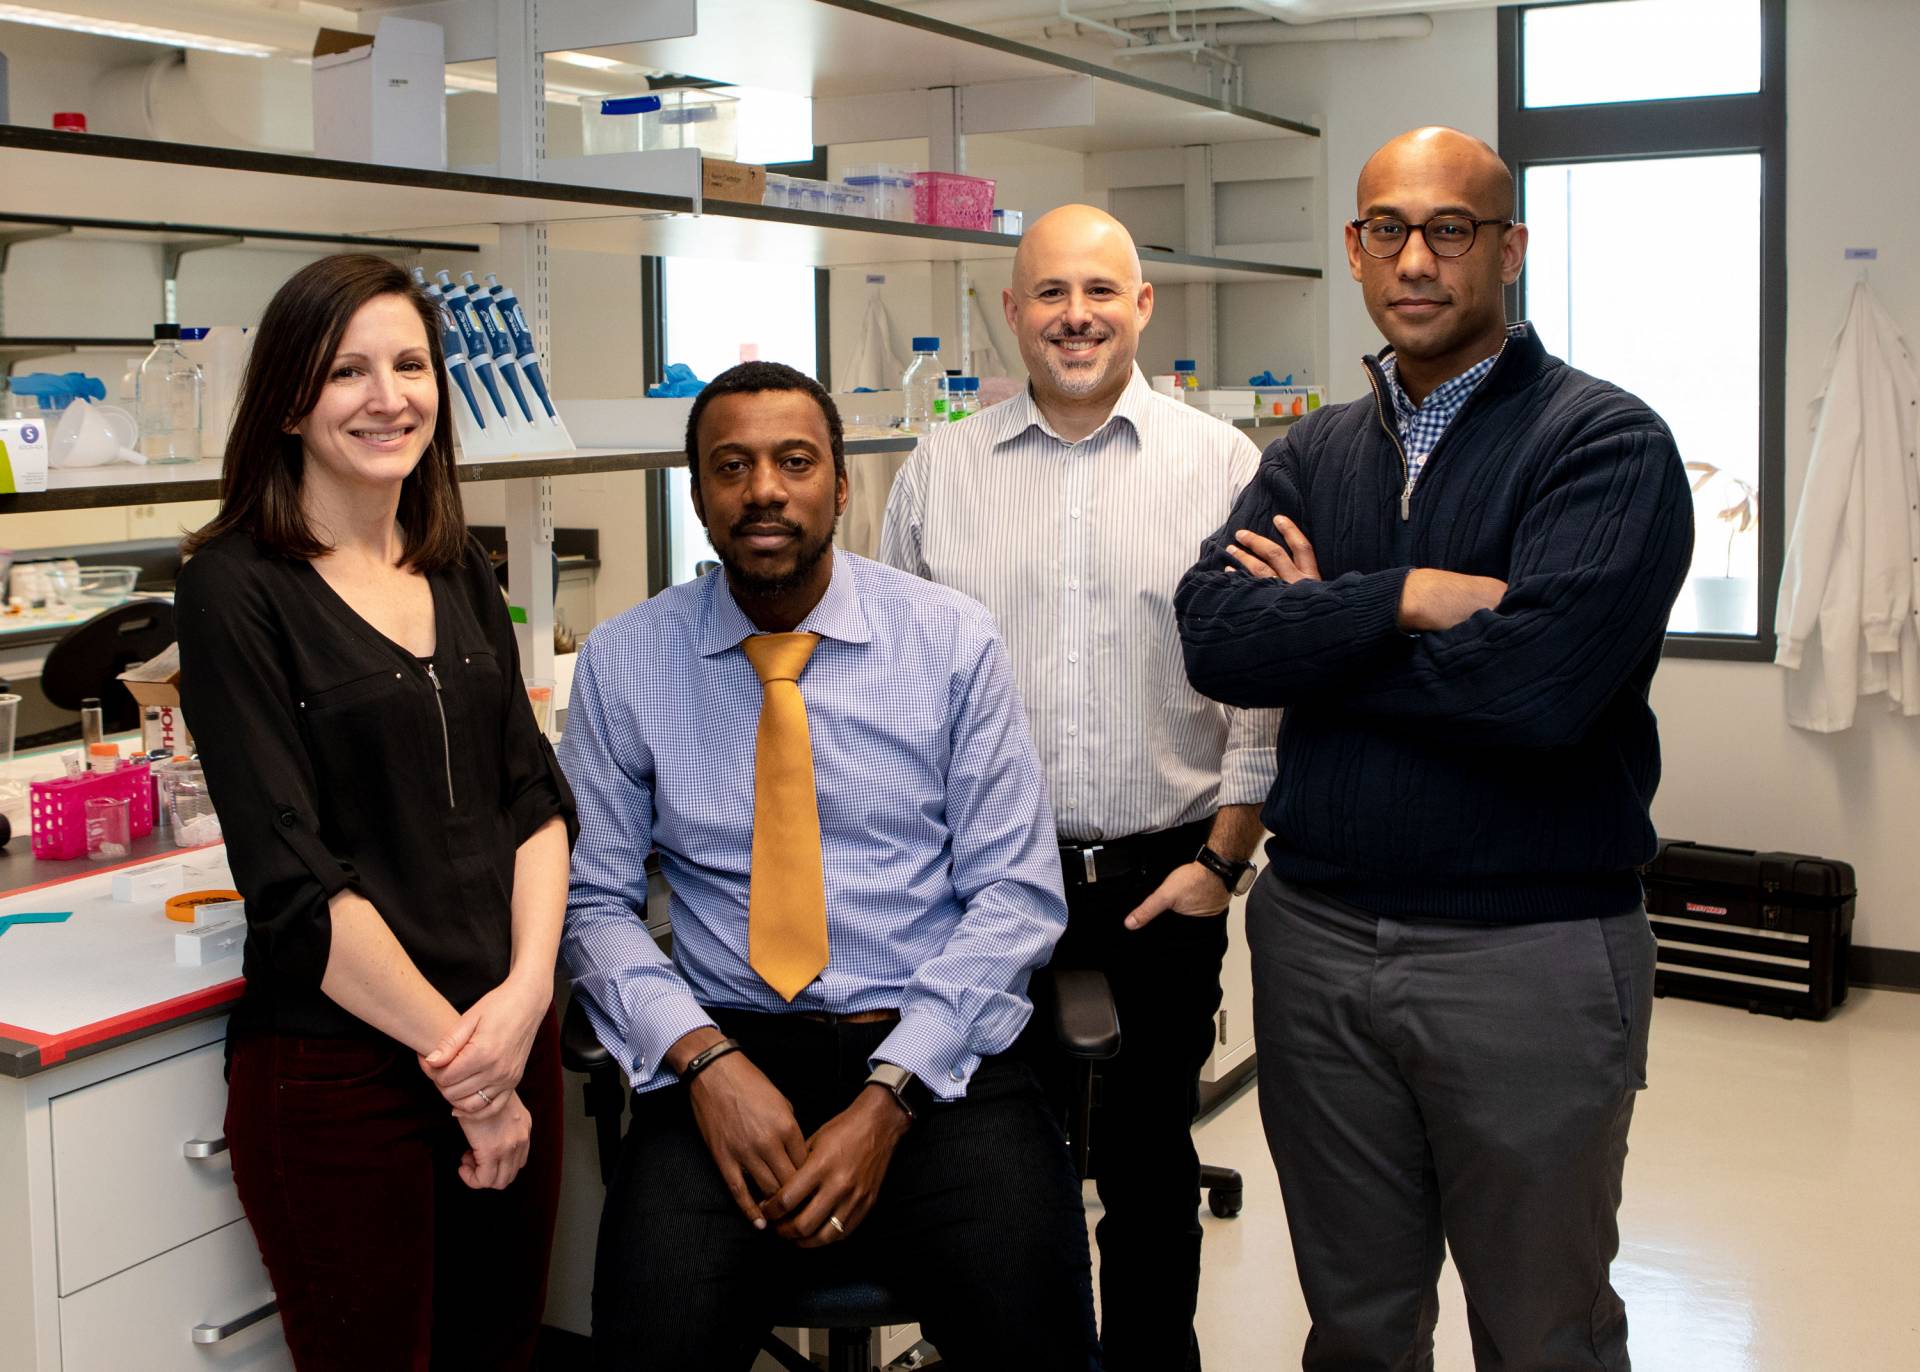 Four researchers pose for photo in lab: Devenport, Priestley, Gitai and Datta.